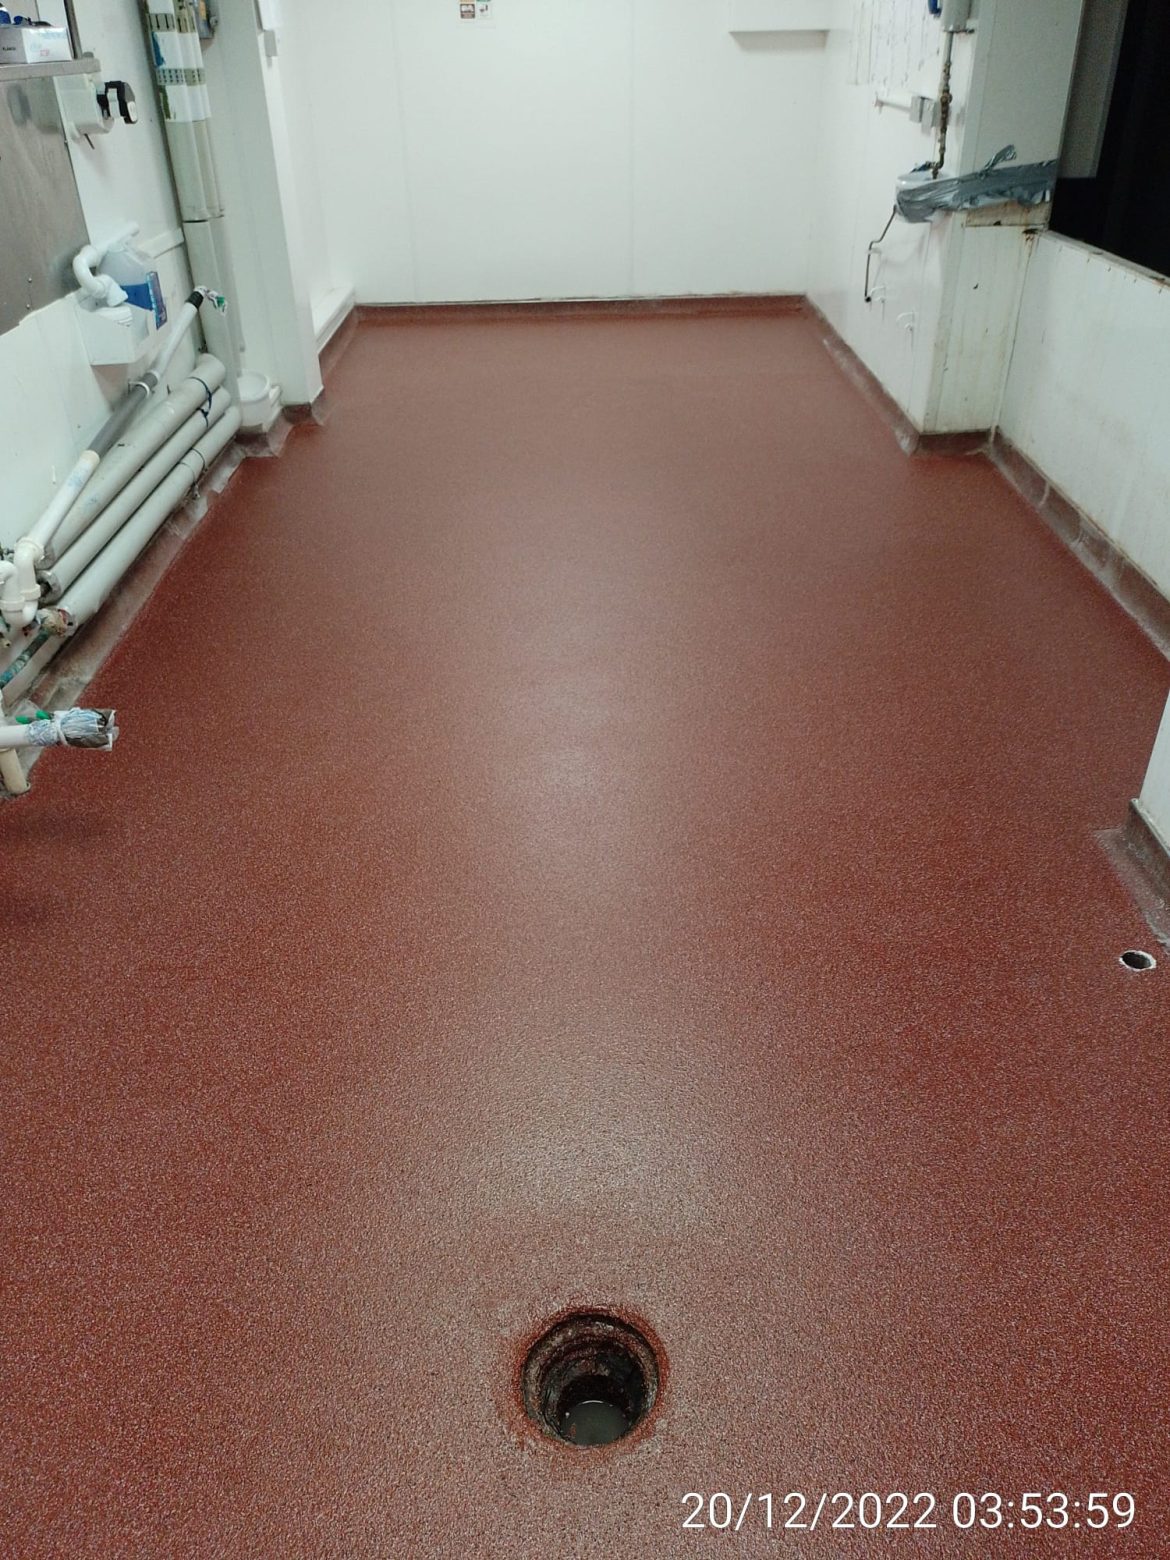 Red New resin kitchen floor with a tight deadline and back-to-back shifts